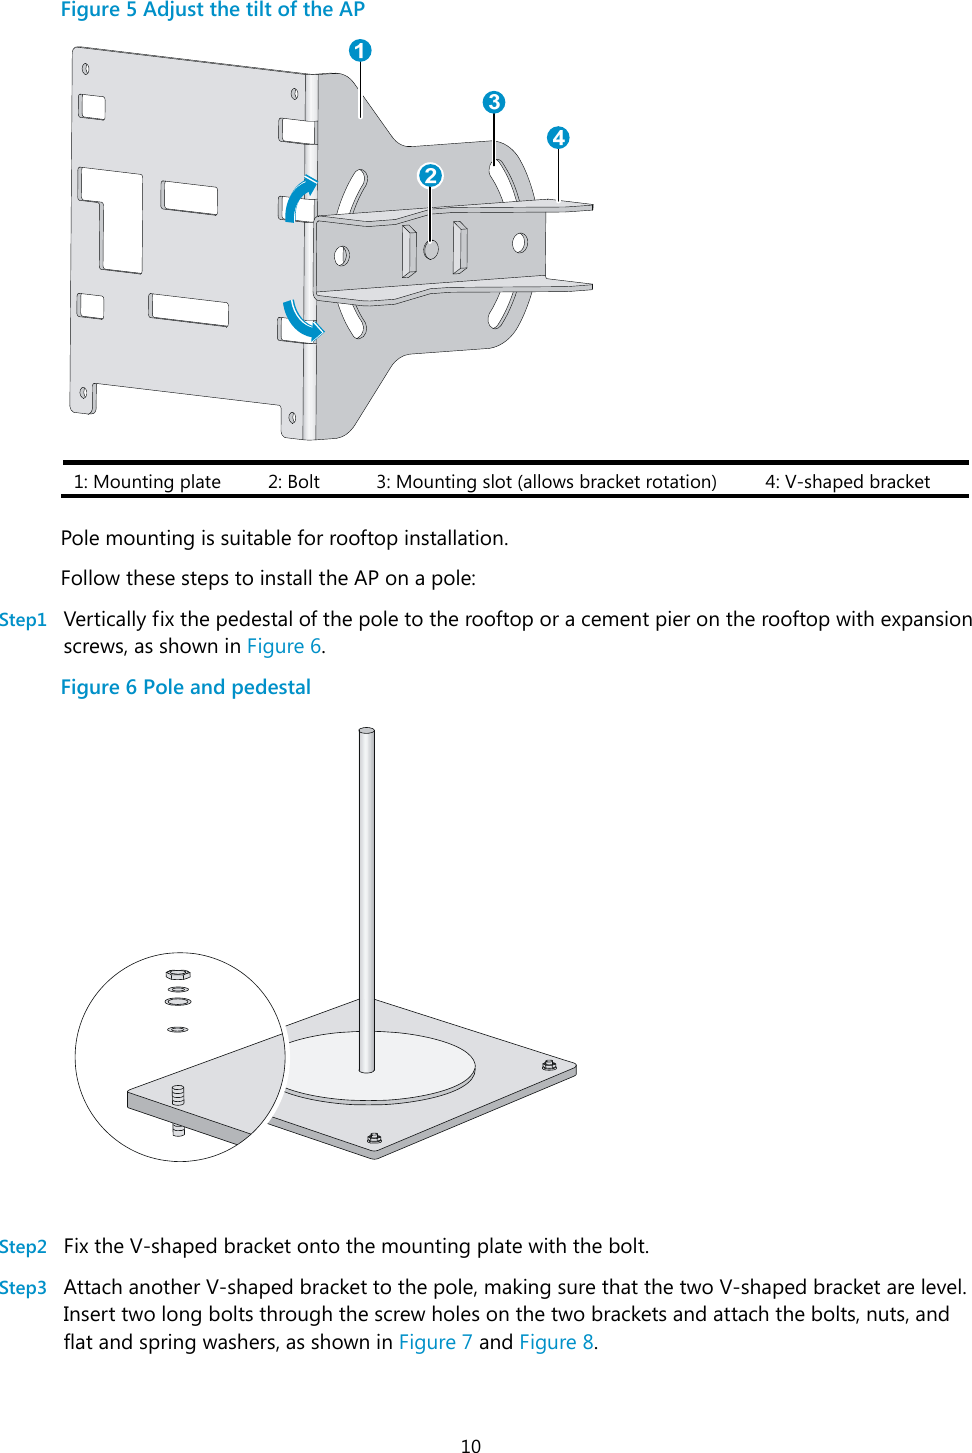  10 Figure 5 Adjust the tilt of the AP  1: Mounting plate  2: Bolt  3: Mounting slot (allows bracket rotation)  4: V-shaped bracket  Pole mounting is suitable for rooftop installation. Follow these steps to install the AP on a pole: Step1 Vertically fix the pedestal of the pole to the rooftop or a cement pier on the rooftop with expansion screws, as shown in Figure 6. Figure 6 Pole and pedestal    Step2 Fix the V-shaped bracket onto the mounting plate with the bolt. Step3 Attach another V-shaped bracket to the pole, making sure that the two V-shaped bracket are level. Insert two long bolts through the screw holes on the two brackets and attach the bolts, nuts, and flat and spring washers, as shown in Figure 7 and Figure 8. 